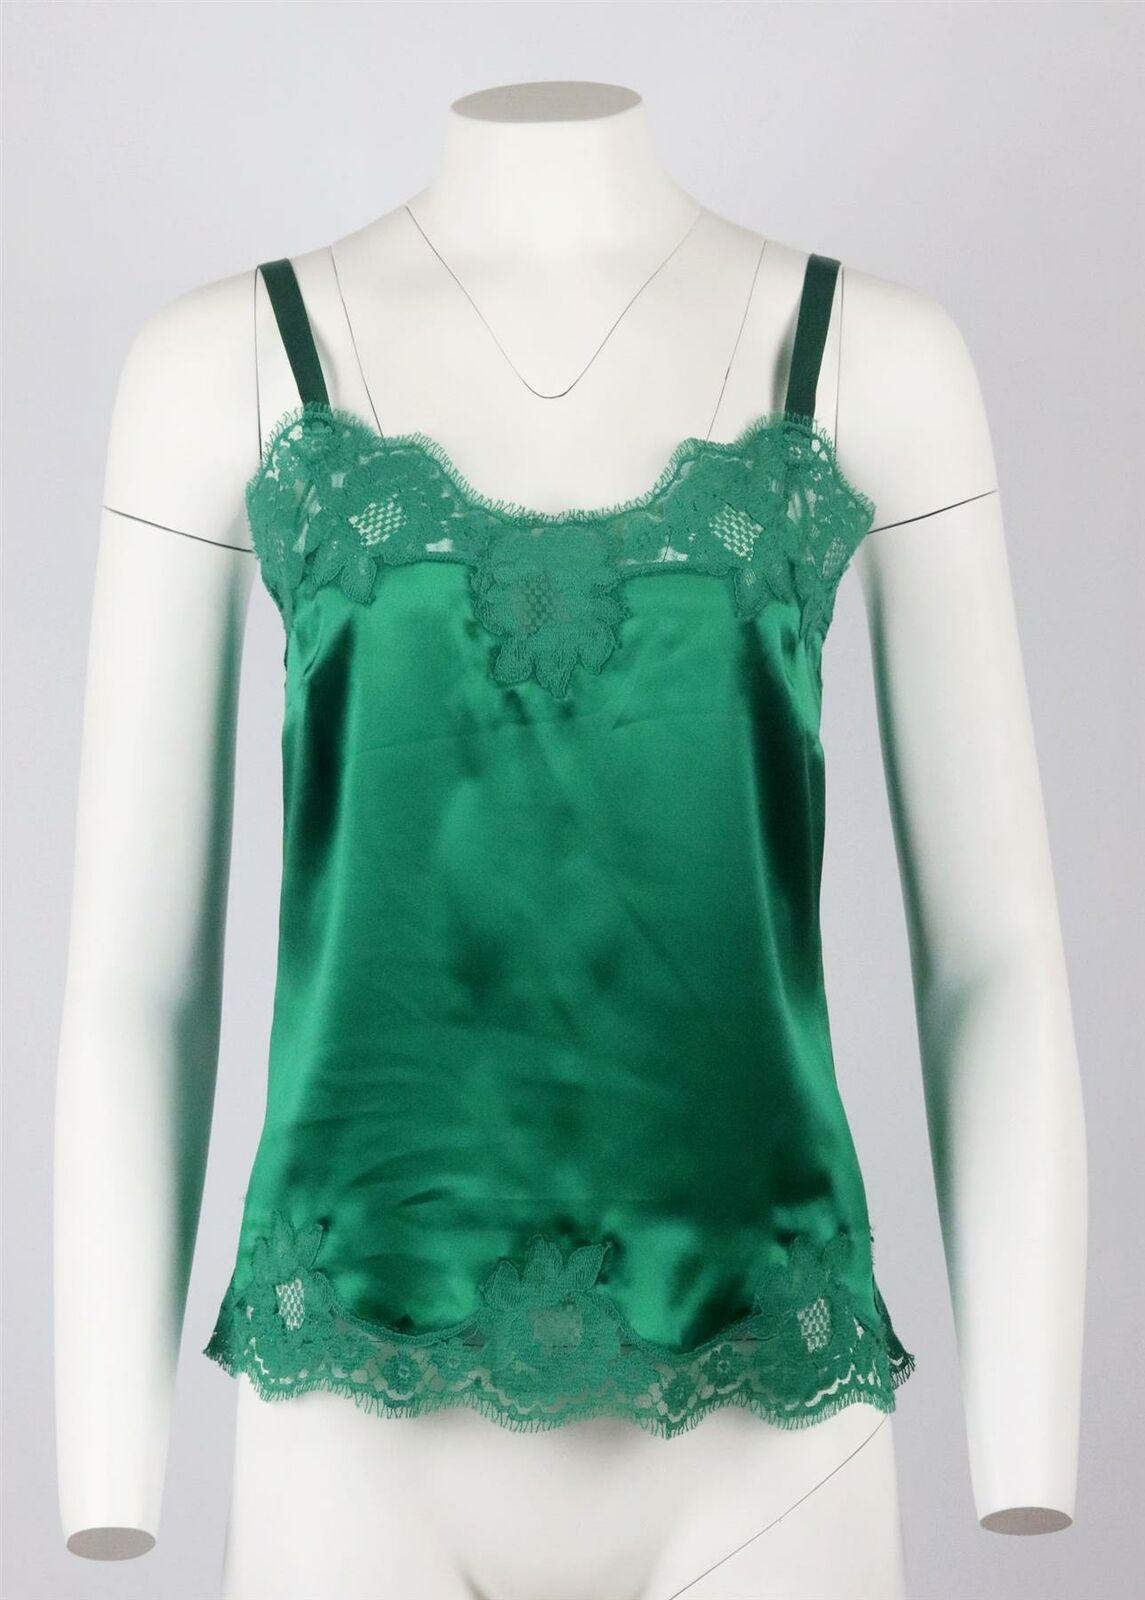 Expertly handcrafted in Italy, Dolce & Gabbana's camisole is made from lustrous silk-satin in a rich green hue, it's trimmed with lace in a matching green tone.
Green silk-satin, green lace.
Slips on.
80% Silk, 12% cotton, 5% elastane, 3%